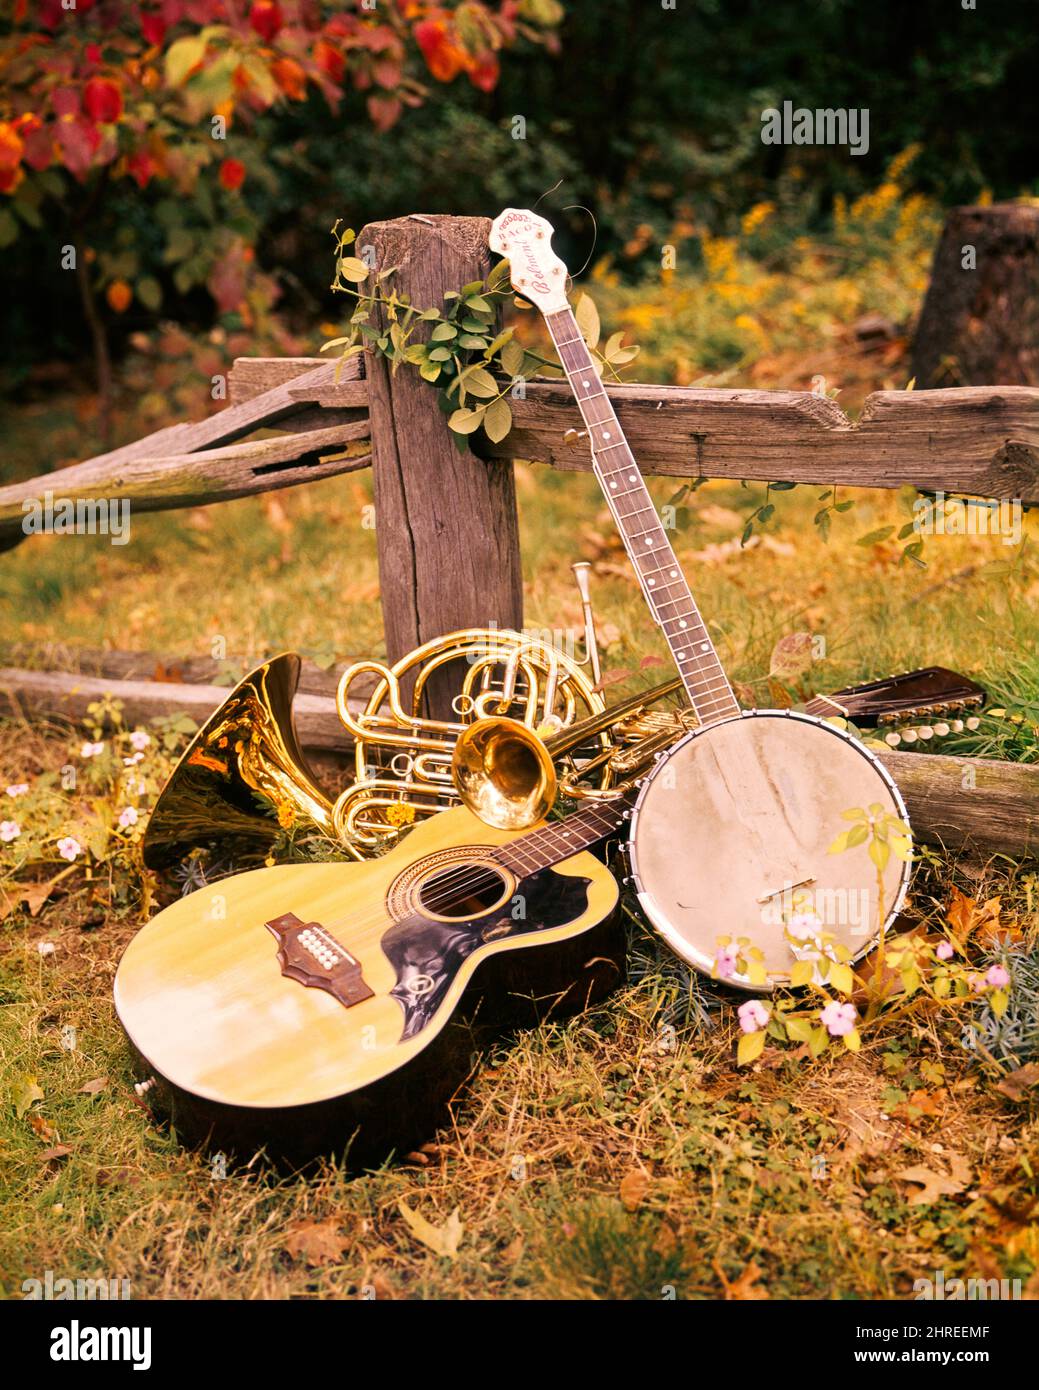 1970s ARRANGEMENT OF MUSICAL INSTRUMENTS GUITAR BANJO FRENCH HORN AND TROMBONE LEANING AGAINST WOODEN SPLIT RAIL FENCE OUTDOORS - km5840 PHT001 HARS CONCEPT CONCEPTUAL STILL LIFE ARRANGEMENT STYLISH TROMBONE STRINGED SYMBOLIC CONCEPTS CREATIVITY ROOTS TOGETHERNESS FRENCH HORN OLD FASHIONED REPRESENTATION Stock Photo